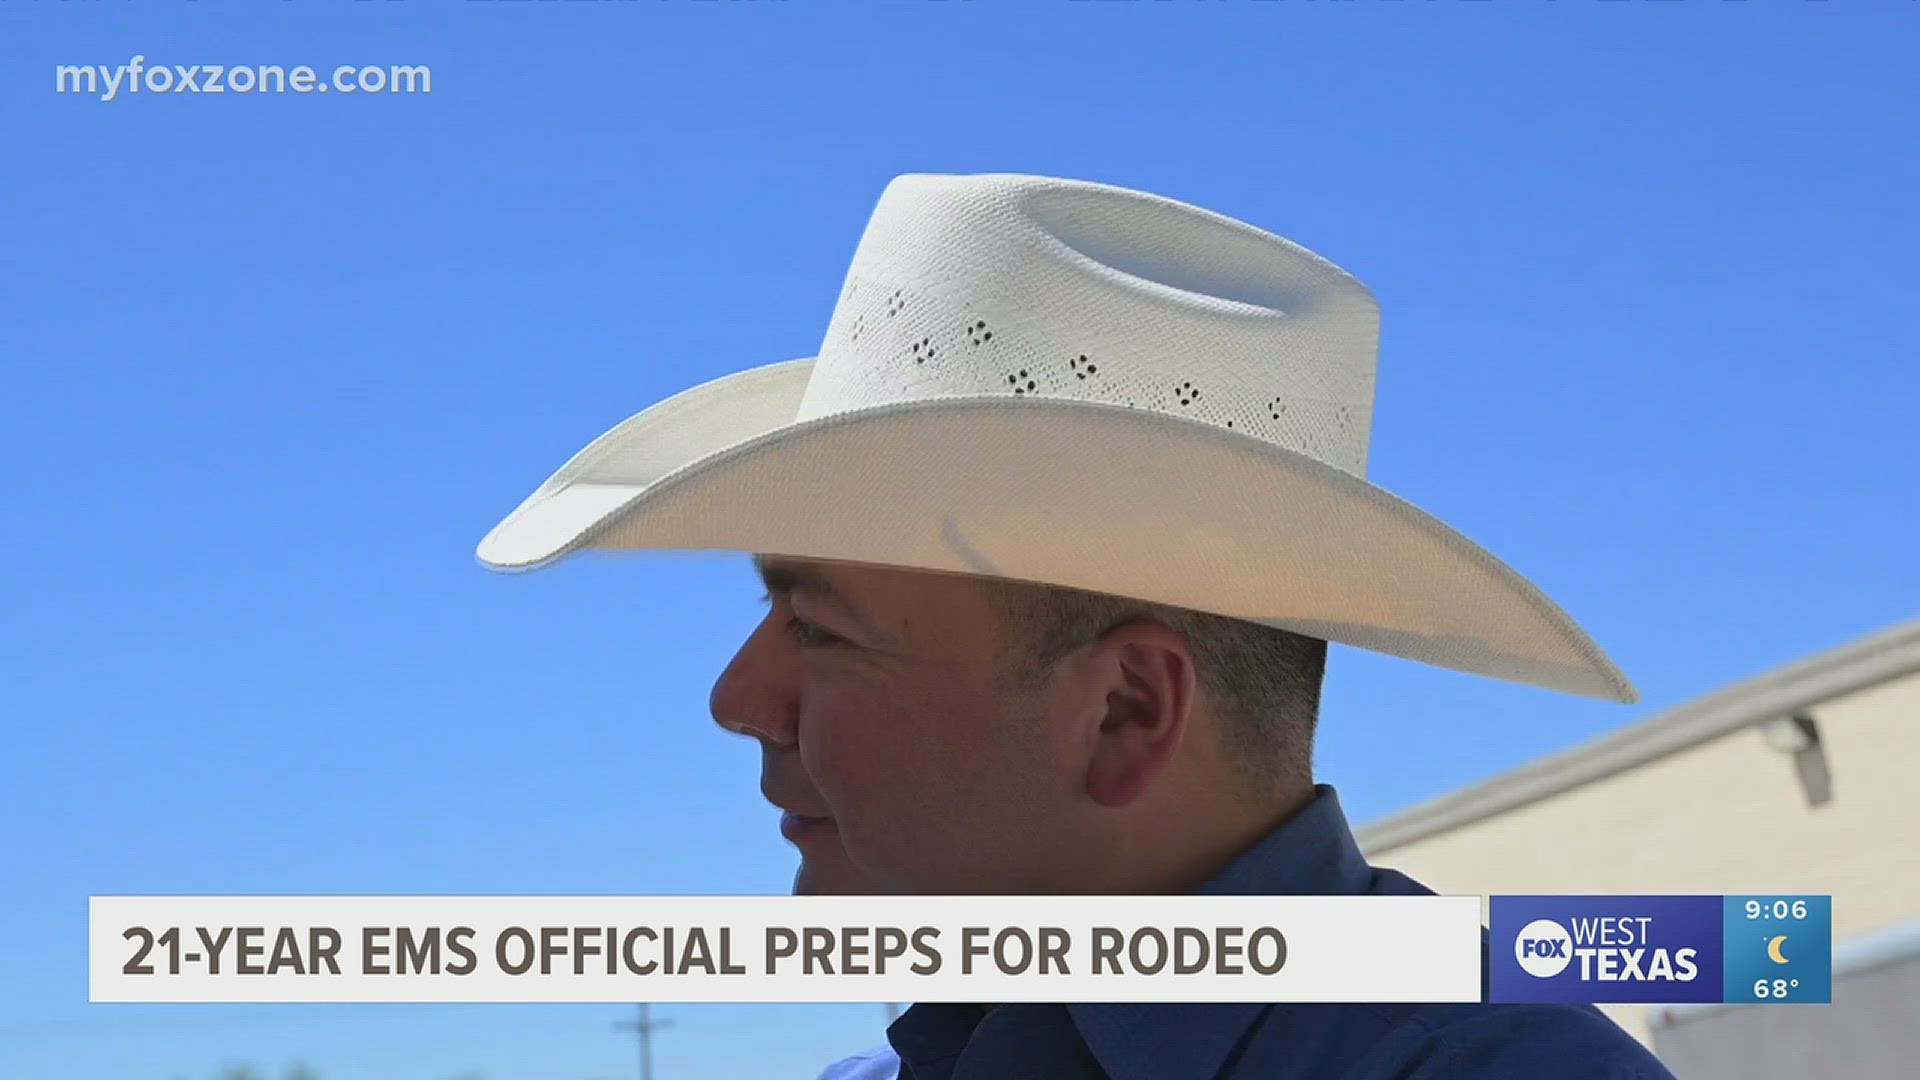 Jose Rivera has volunteered and eventually been contracted to work for the San Angelo Rodeo as an EMS professional.